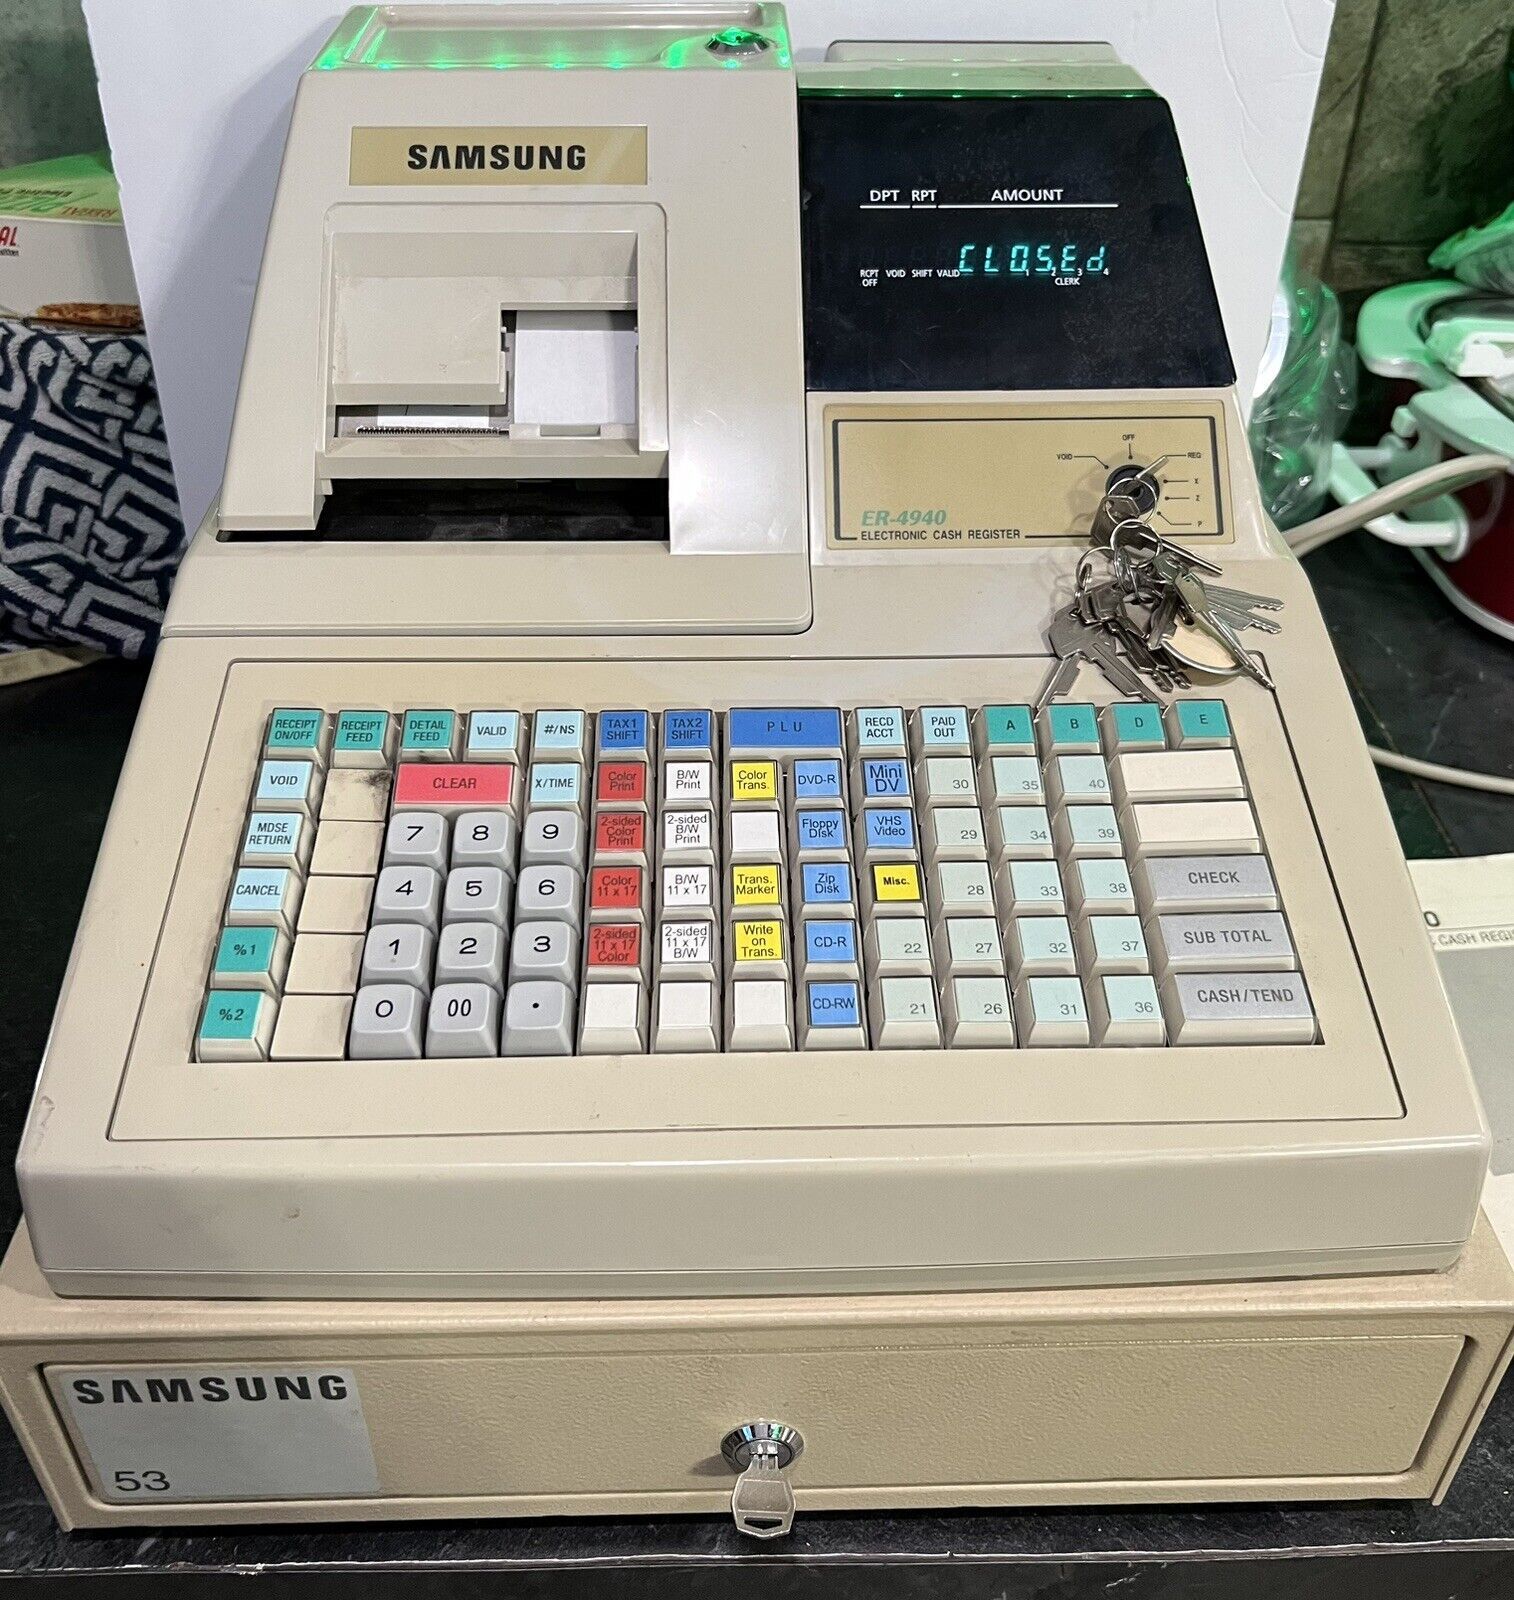 Samsung ER-4940 Electronic Cash Register With Operator’s Manual